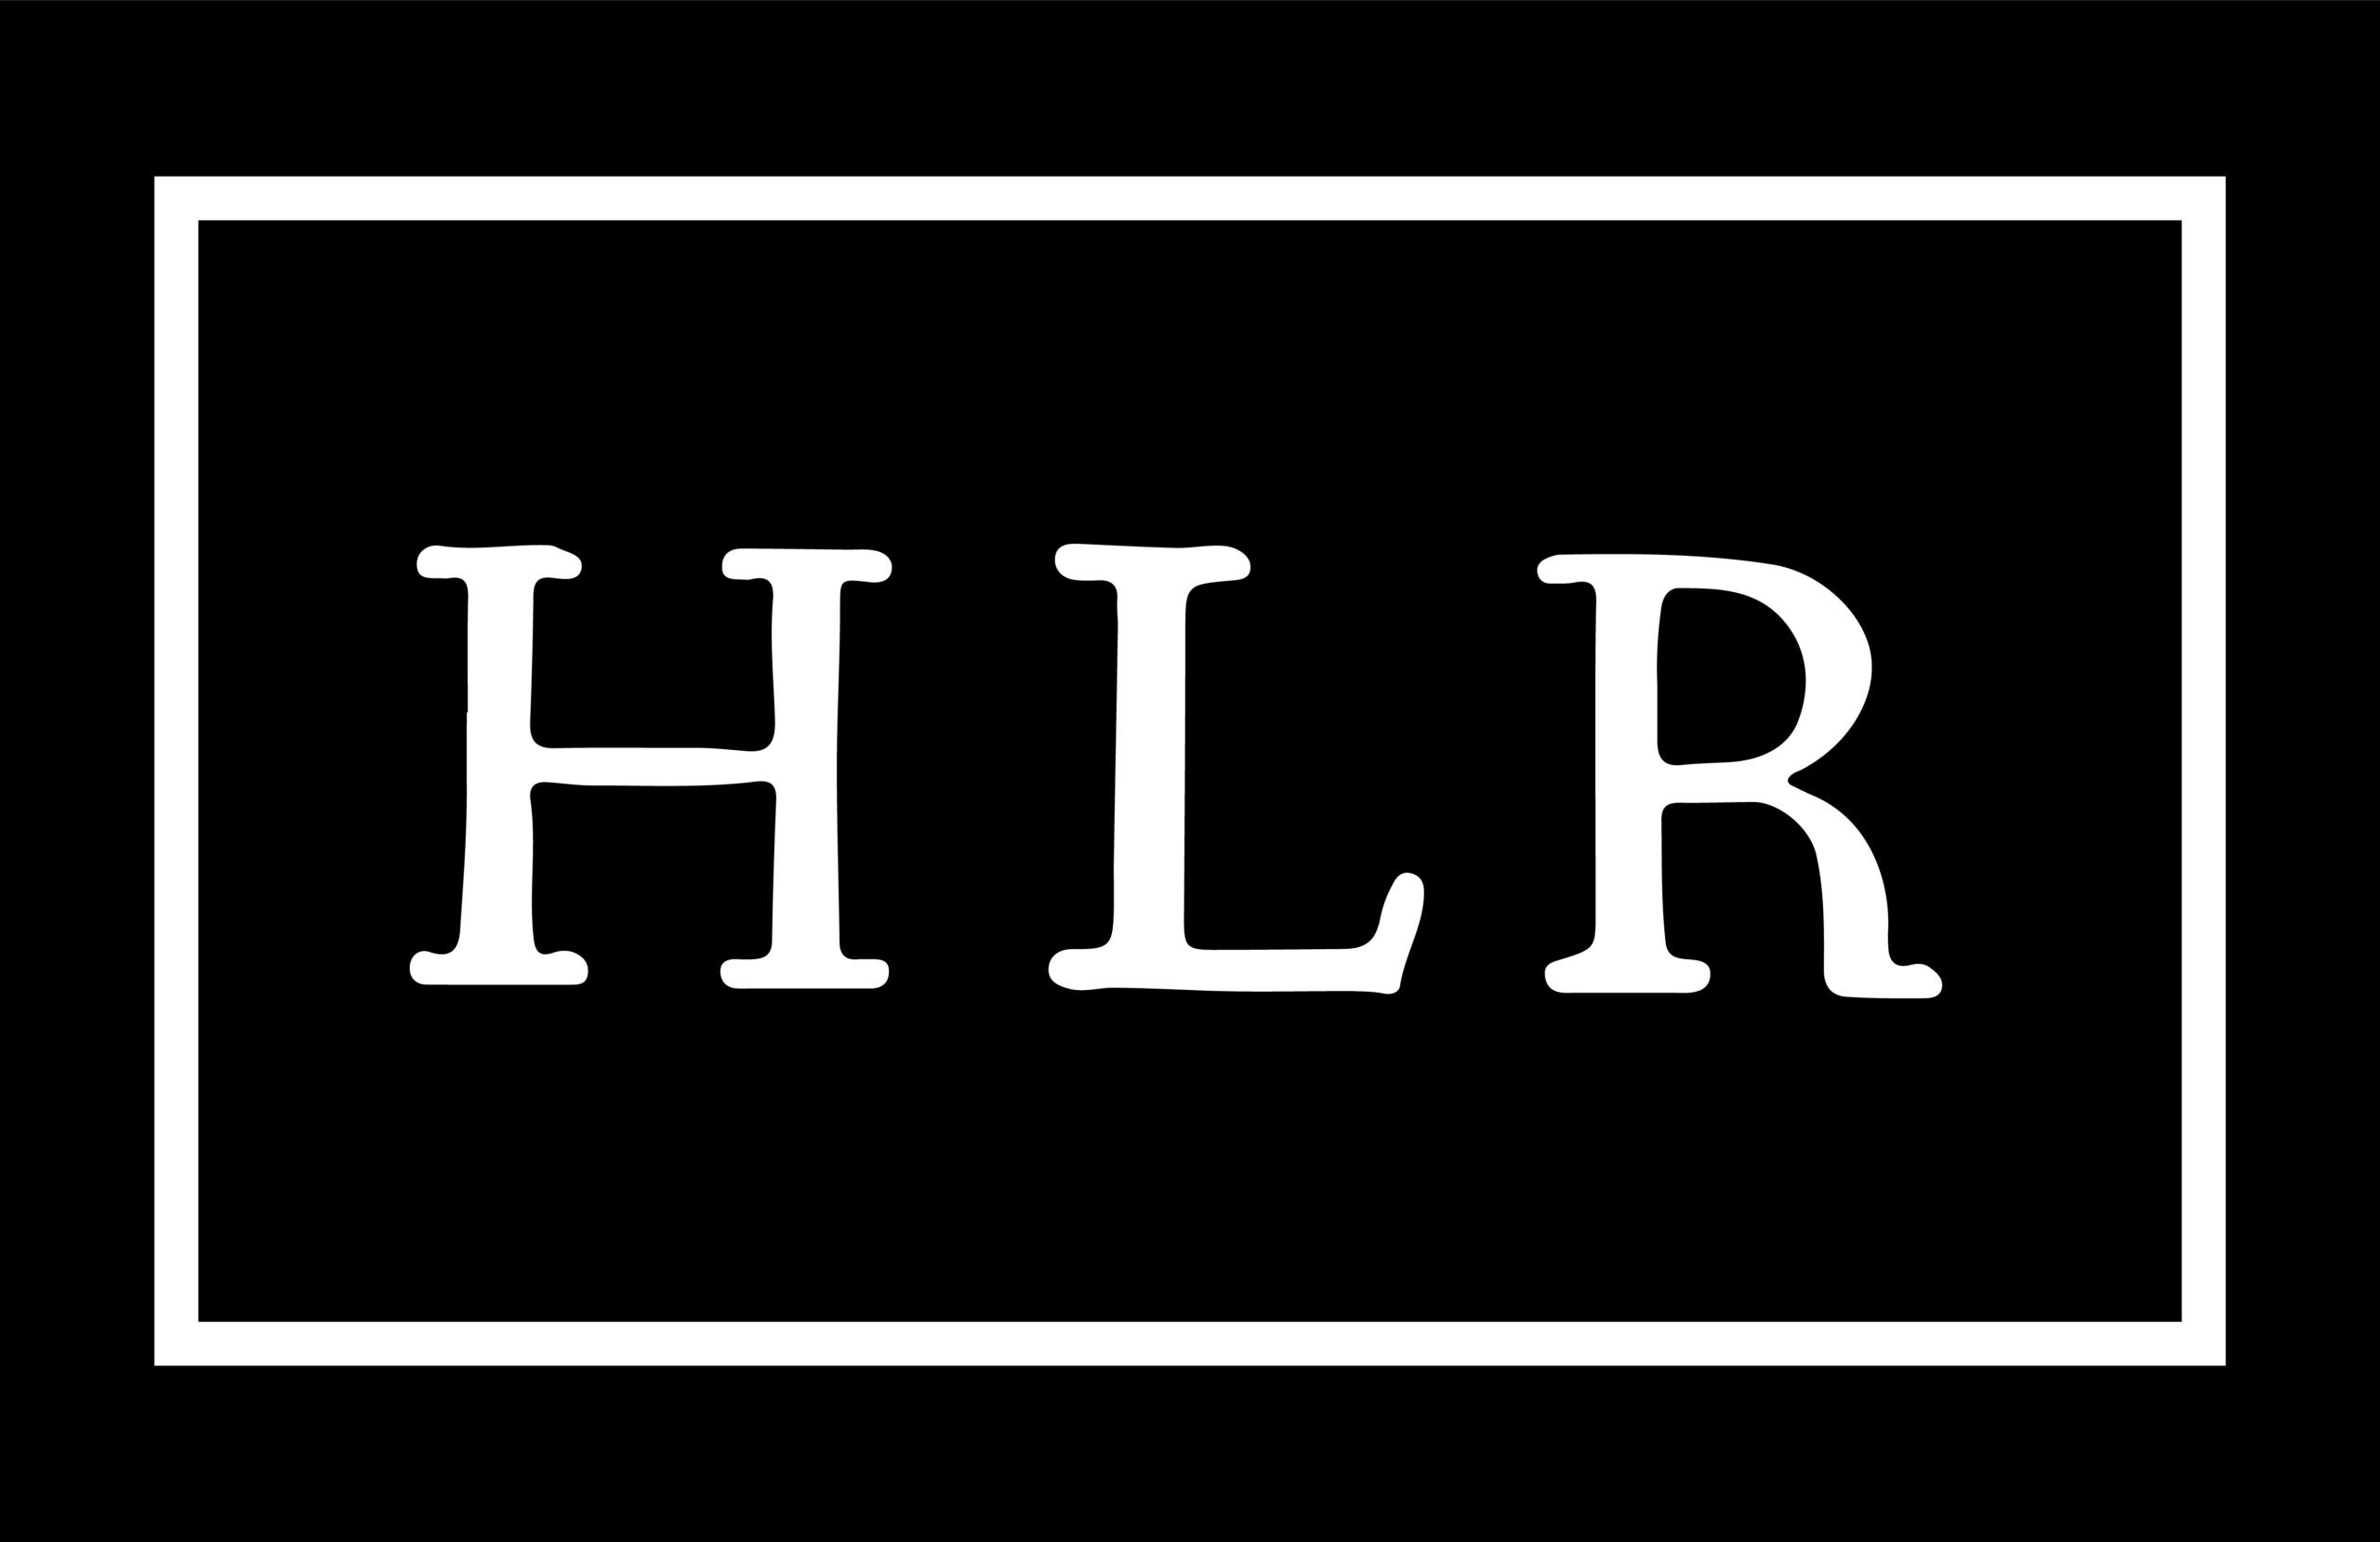 Harvard Law Review launches new online platform